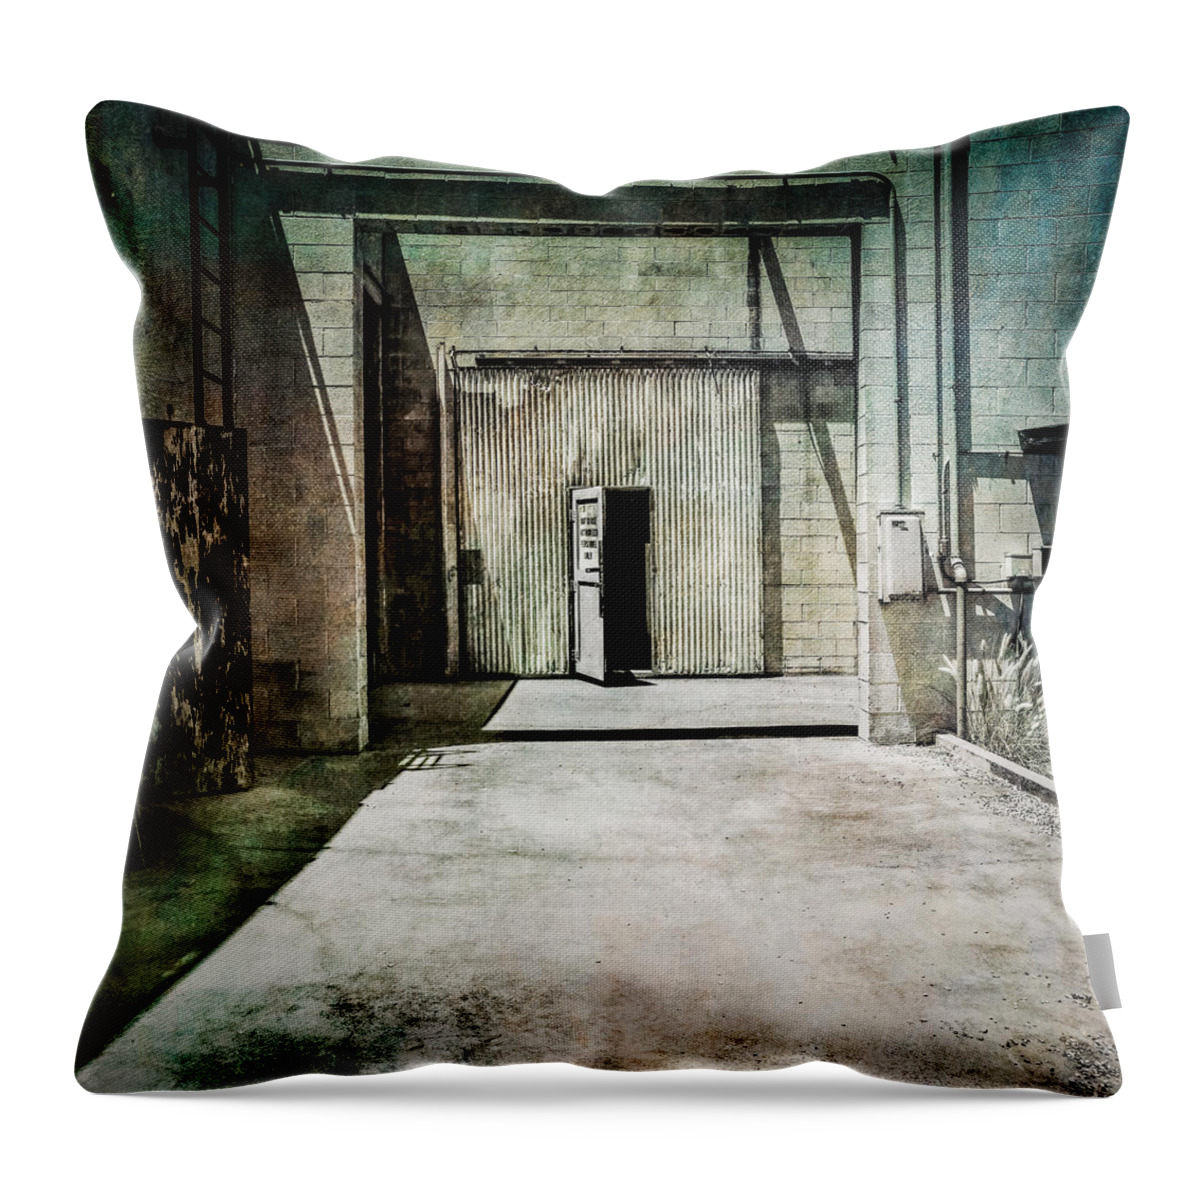 Abandoned Throw Pillow featuring the photograph Pacific Airmotive Corp 28 by YoPedro